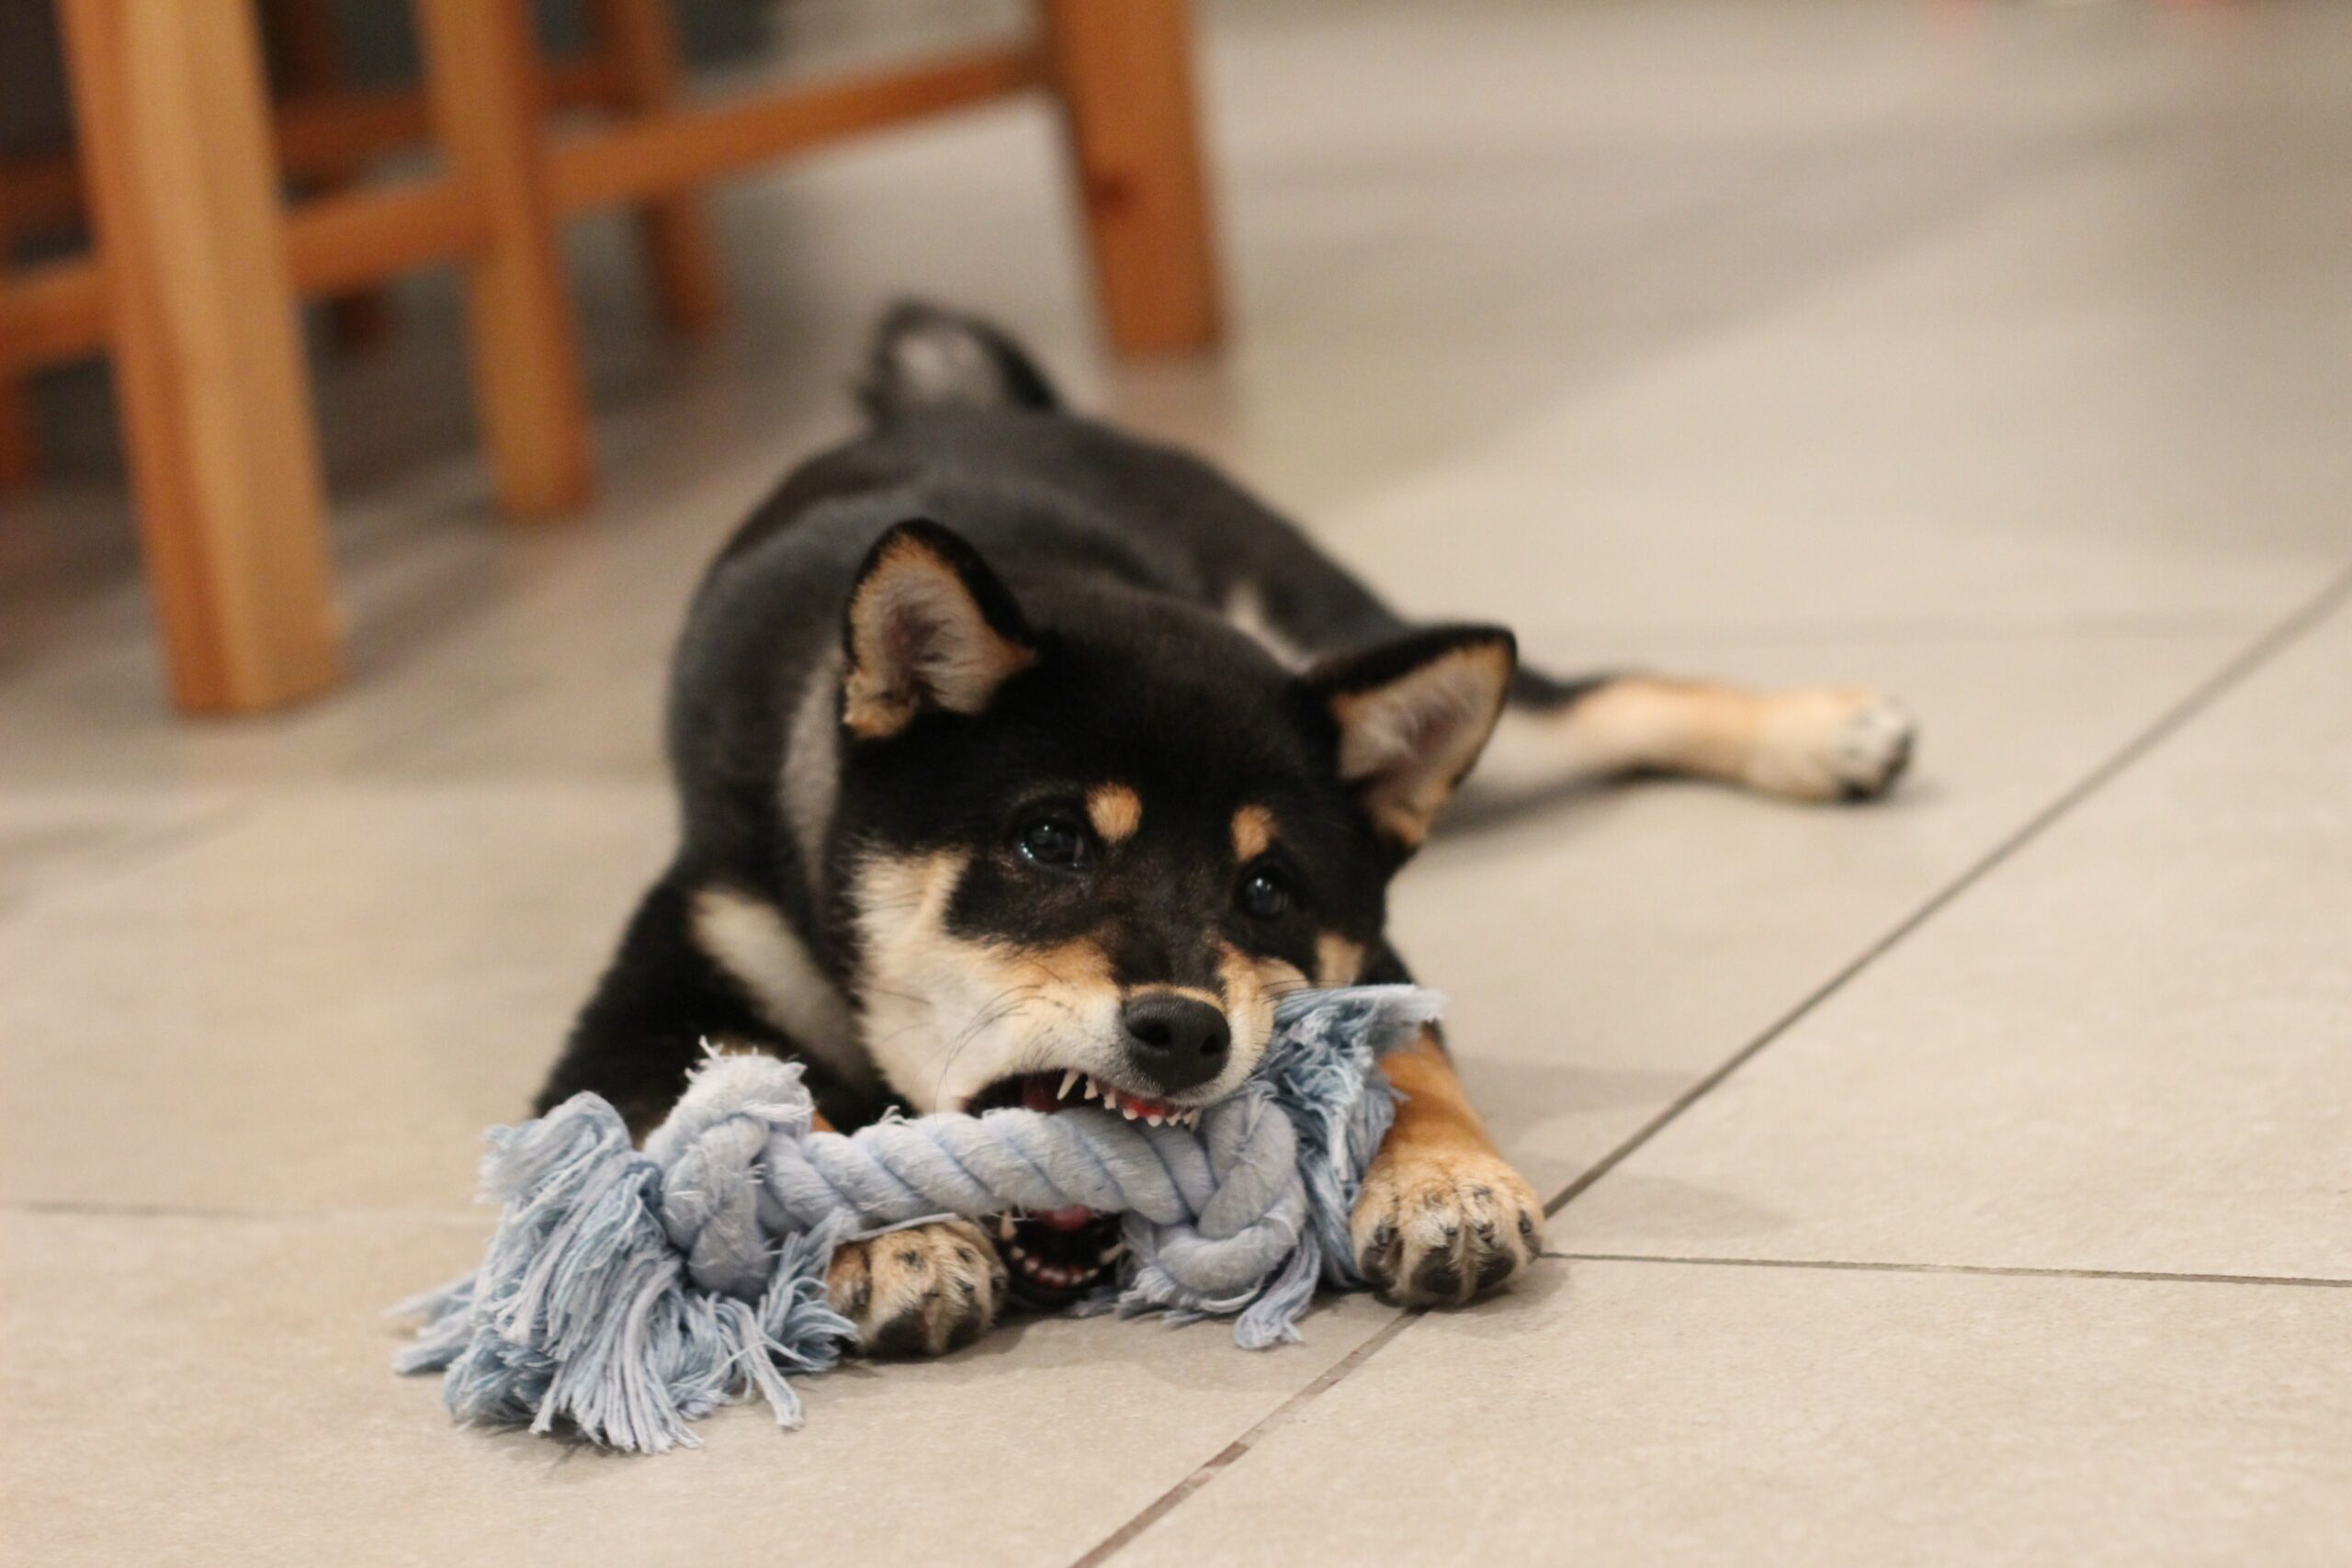 What Types of Toys can Make Dogs Happy?